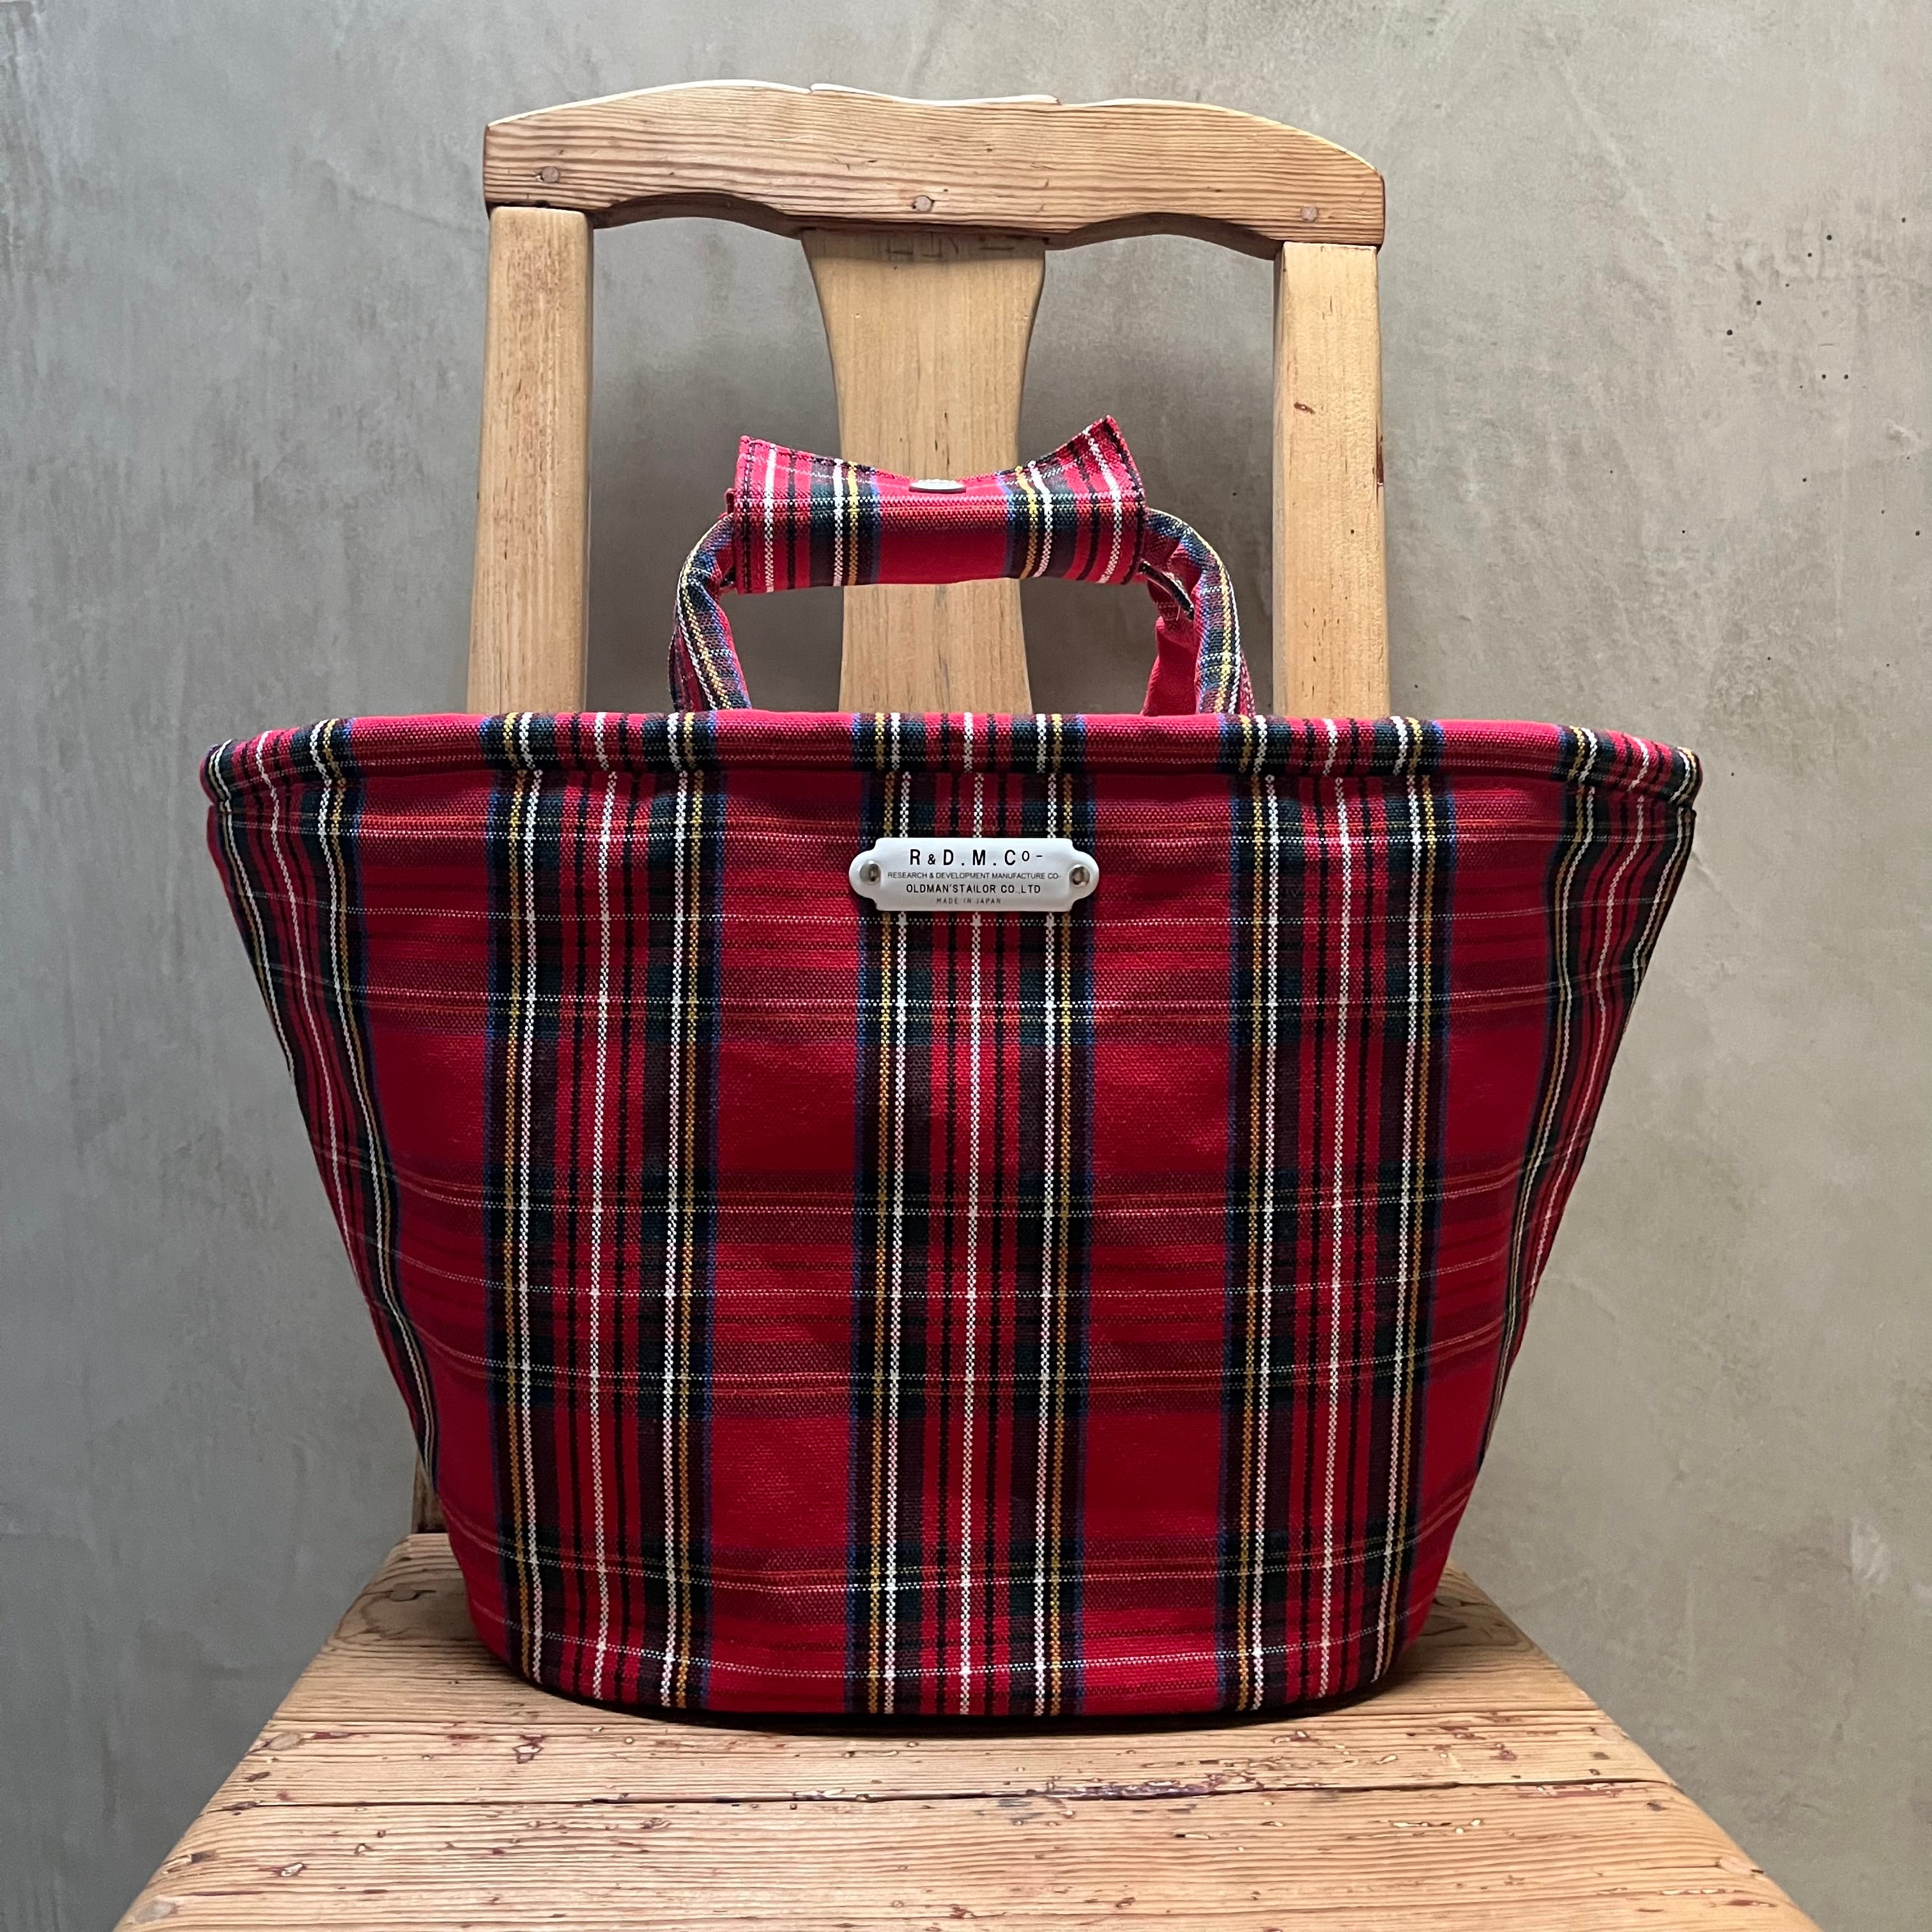 R&D.M.Co-/OLDMANS TAILOR(アールアンドディーエムコー/オールドマンズテーラー) / Tartan check marche  bag (s) Royal Stewart #5732 | Routes*Roots powered by BASE